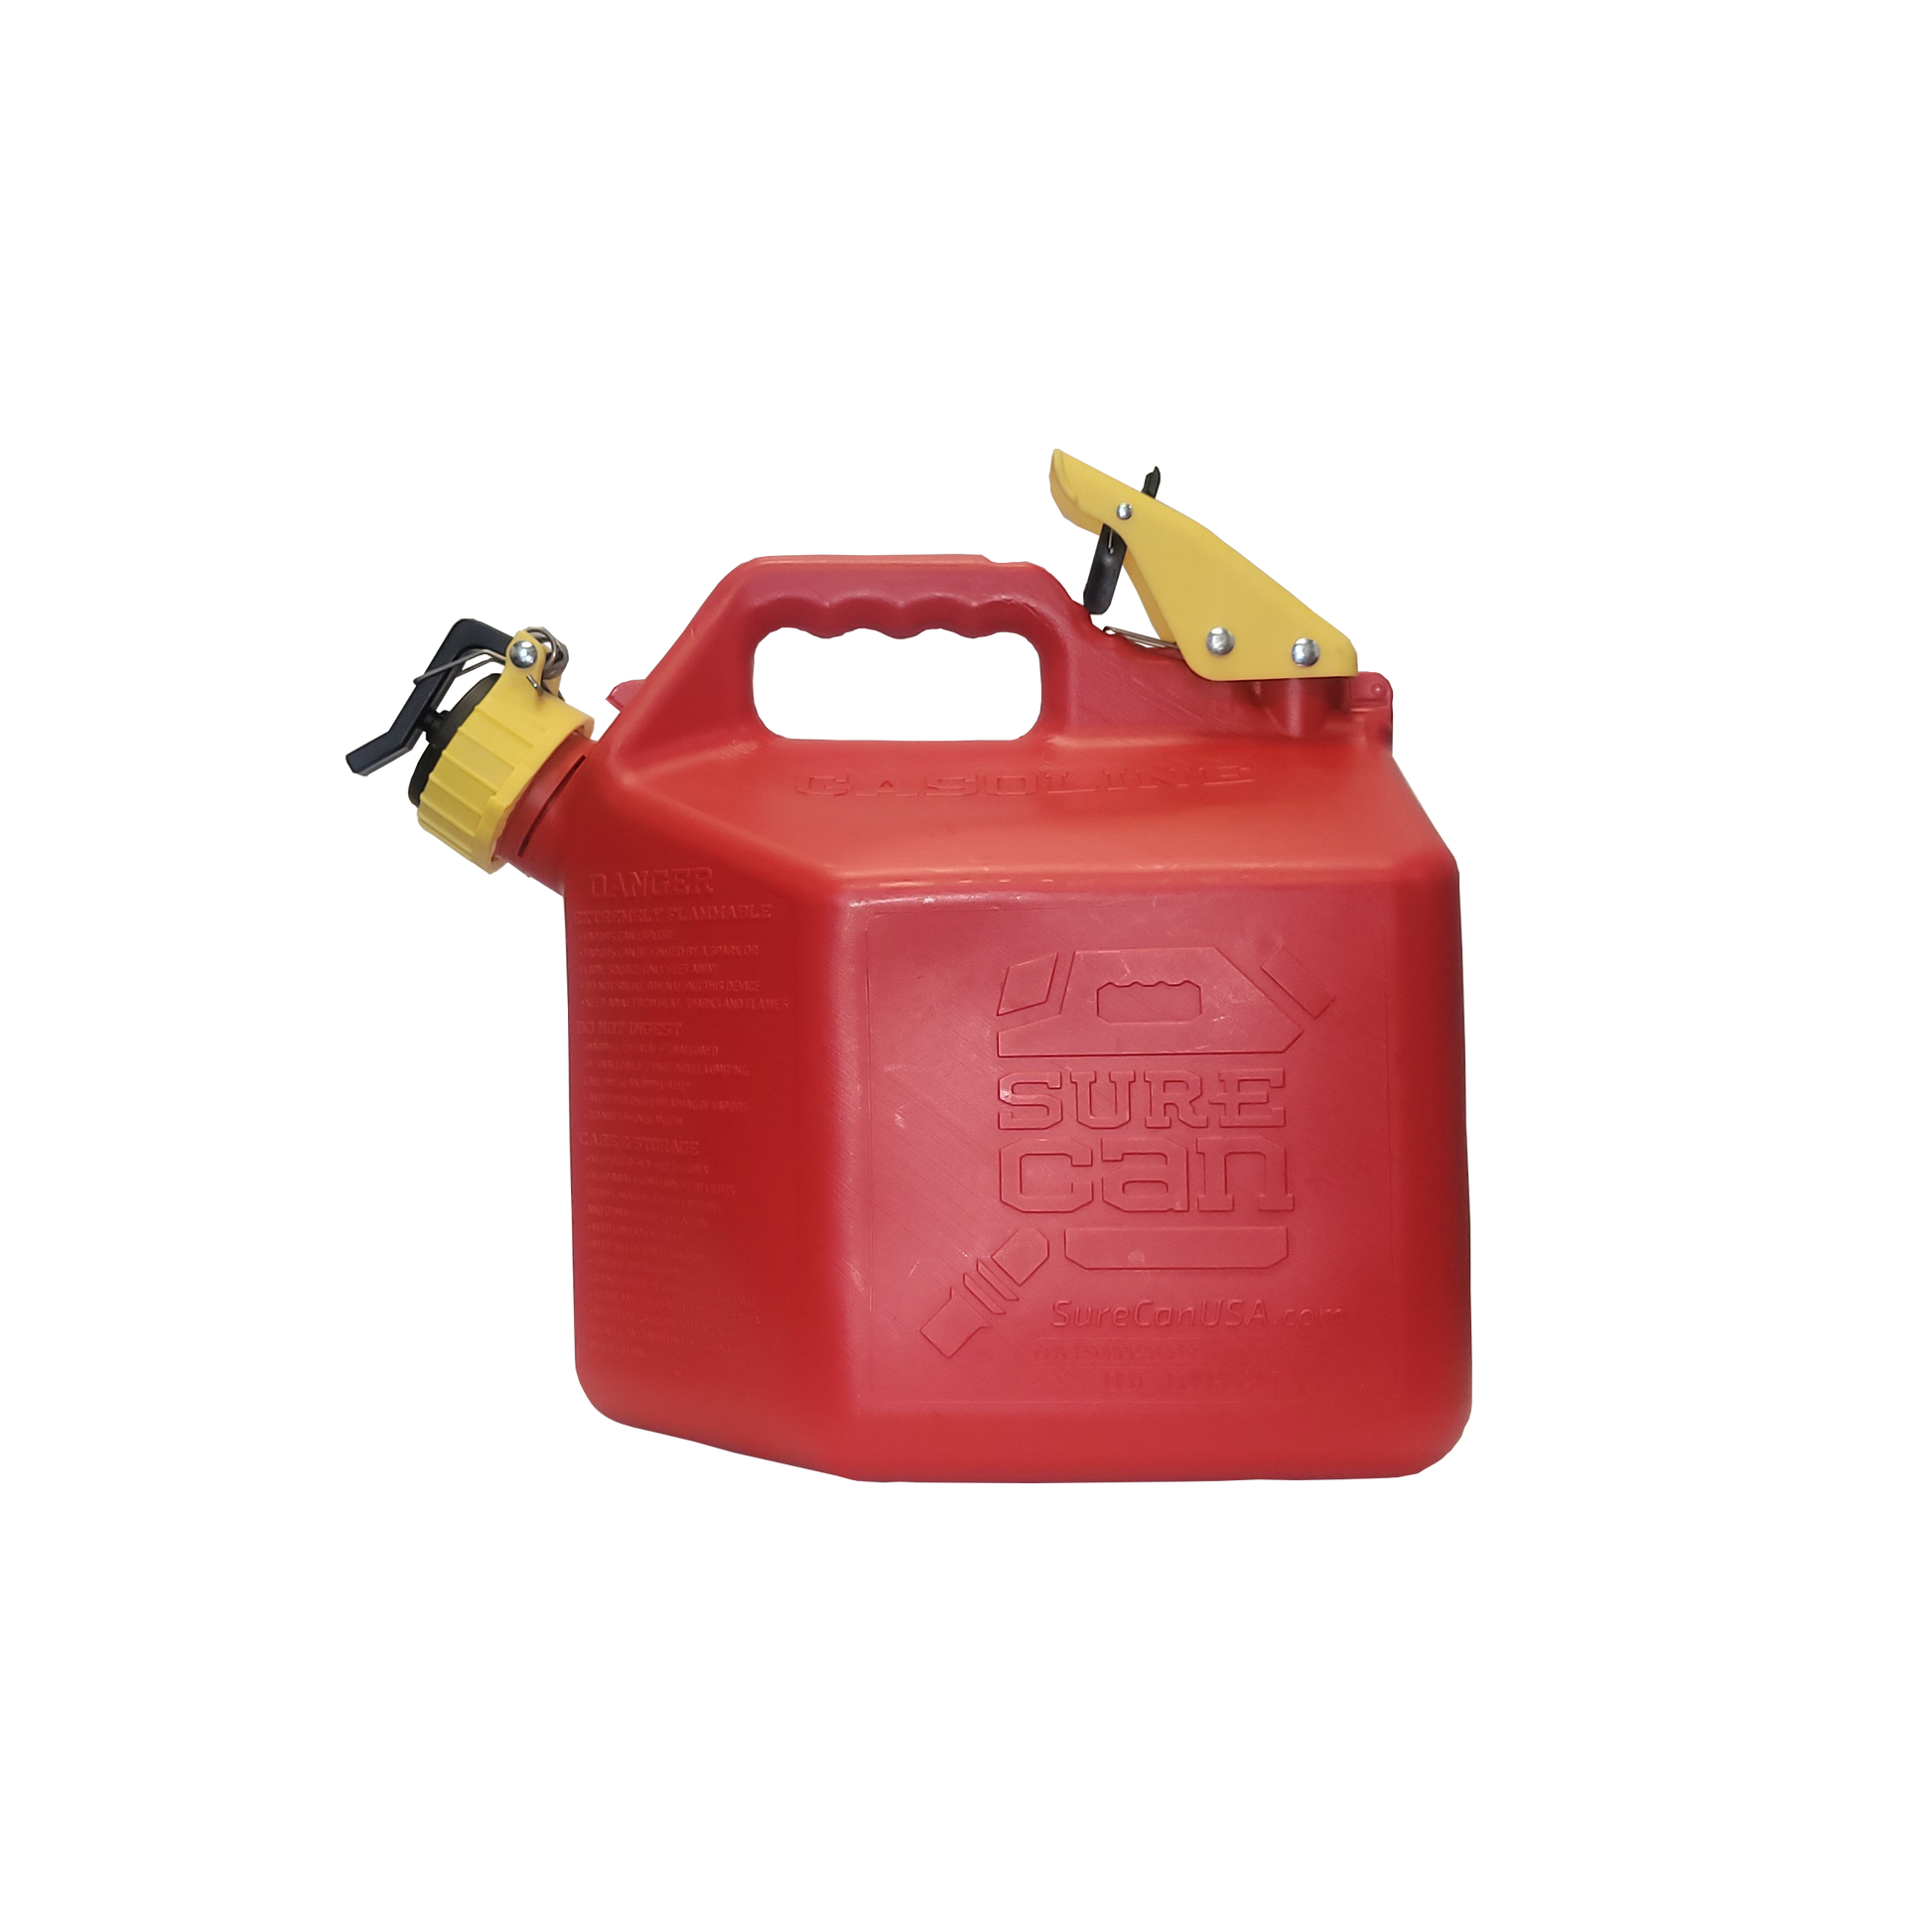 2+ Gallon Gasoline Type II Safety Can